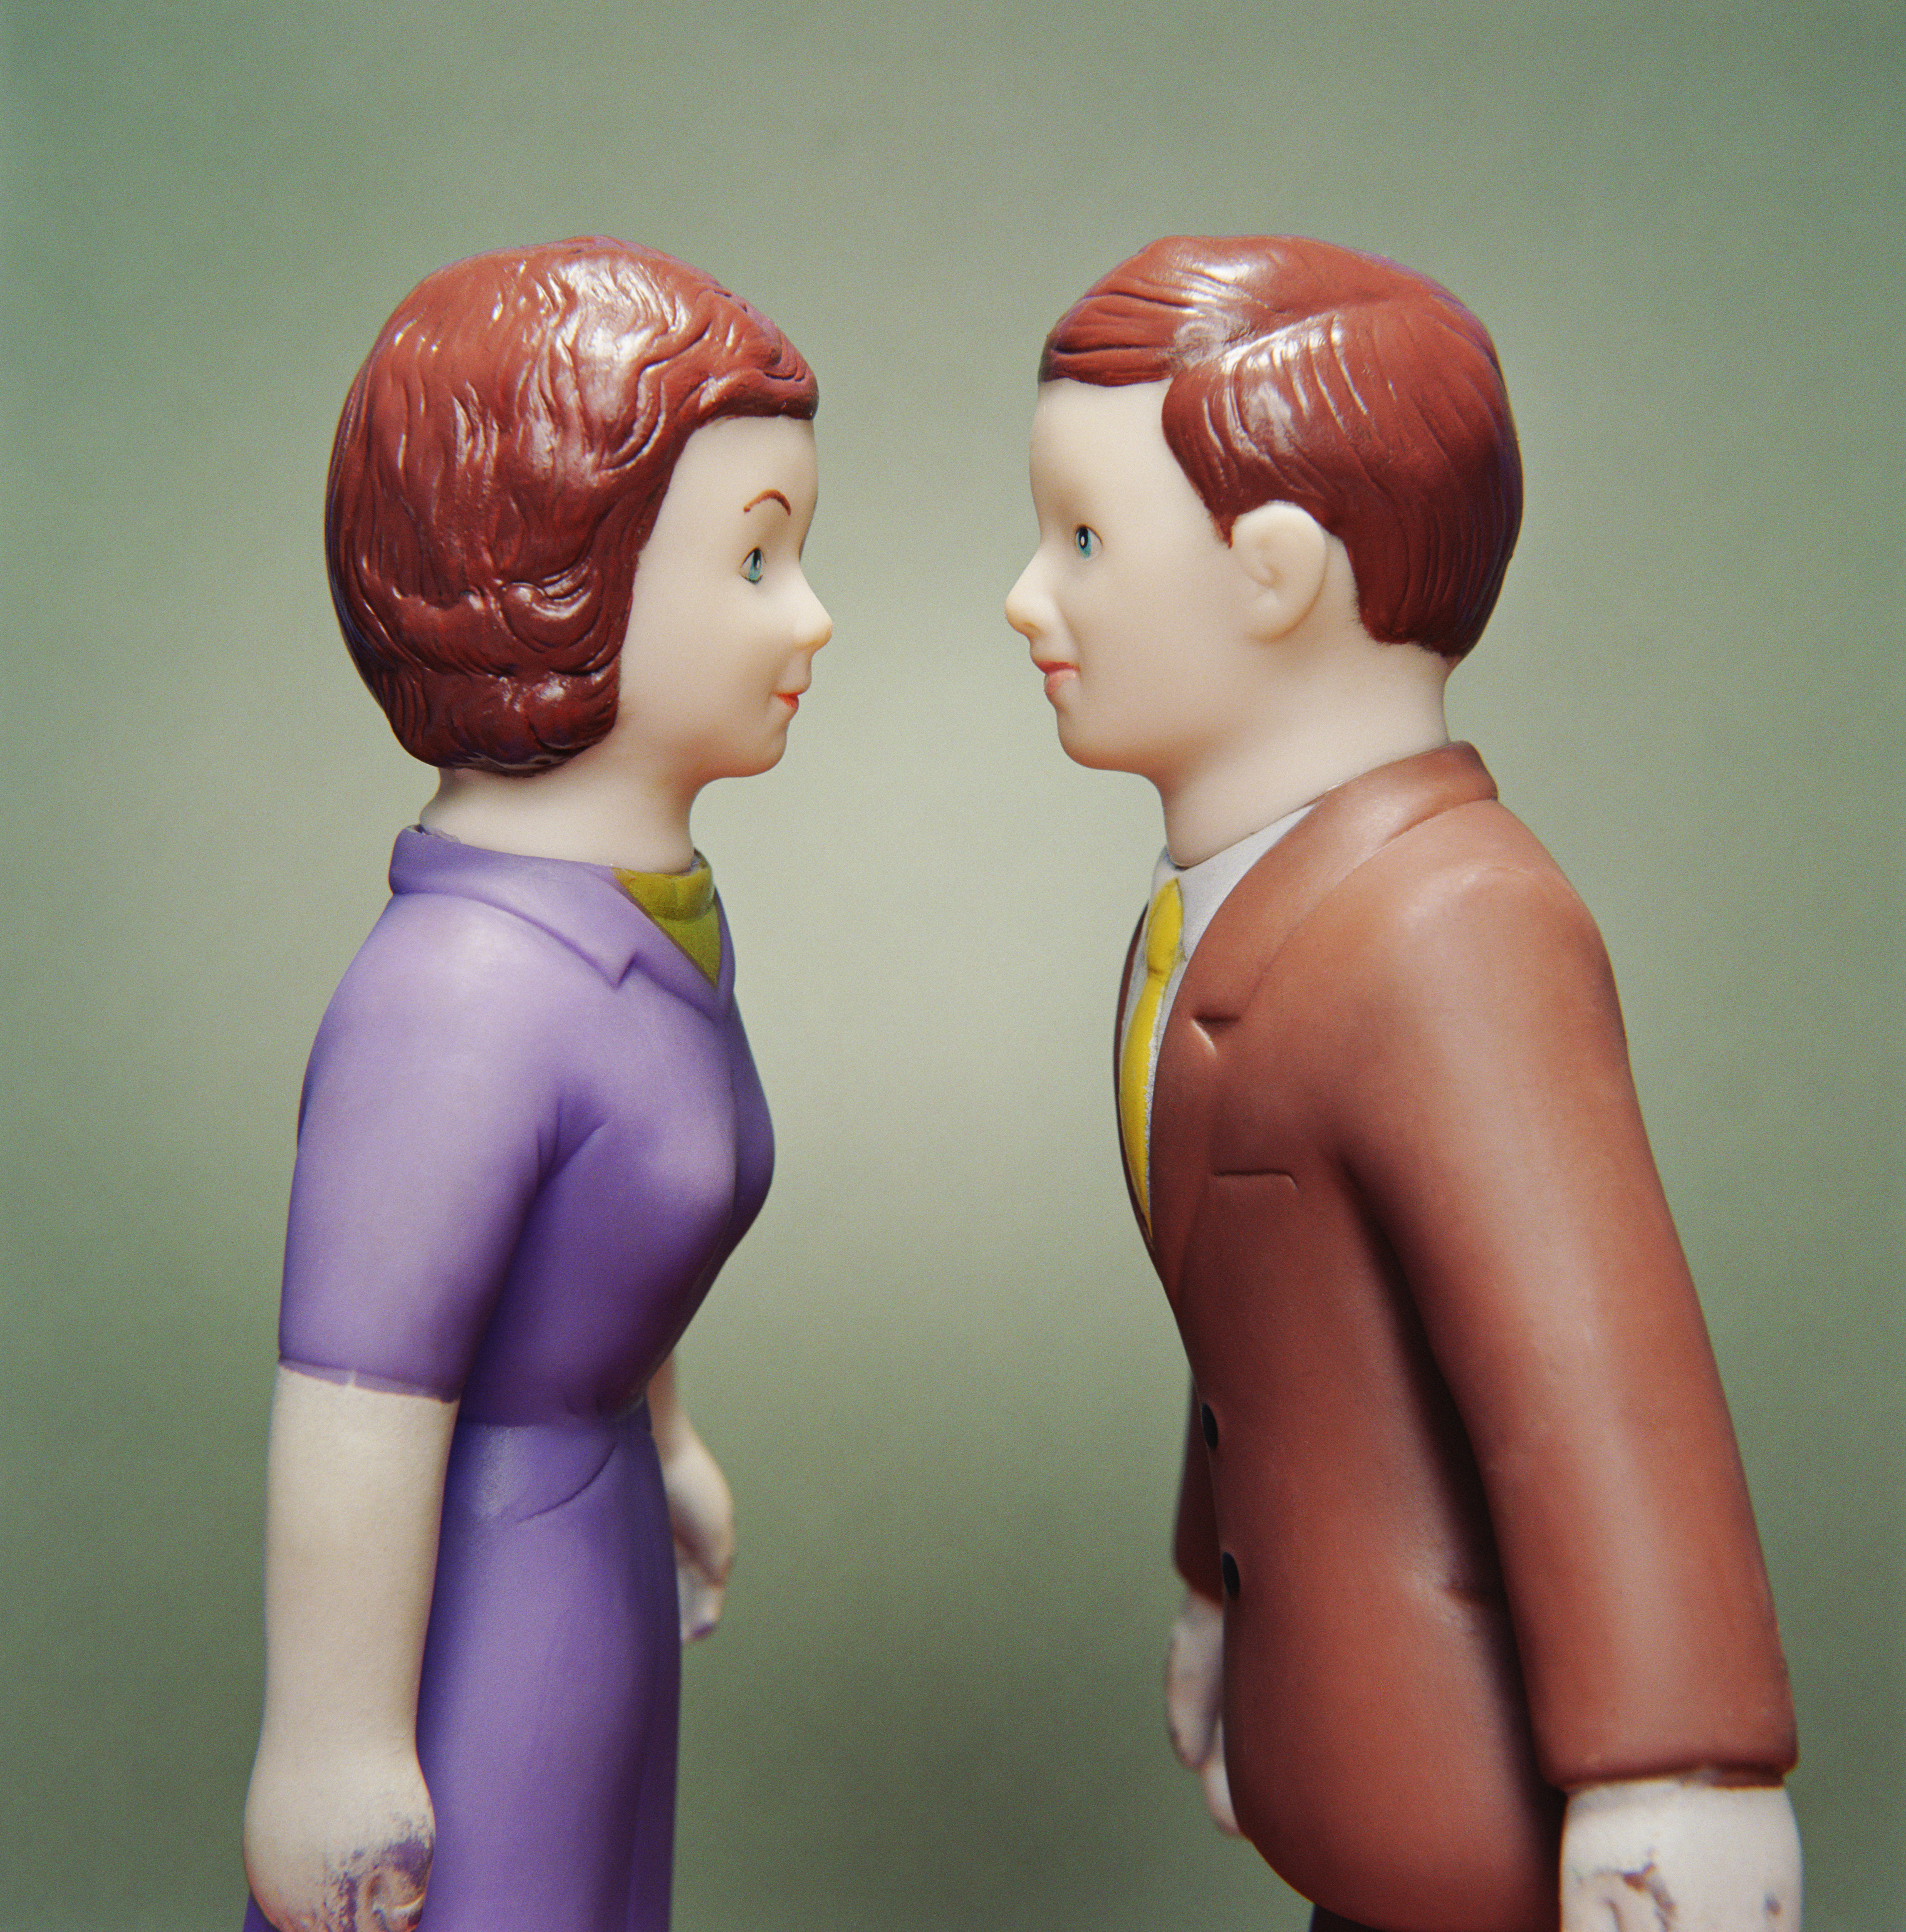 couple-figurines-facing-each-other